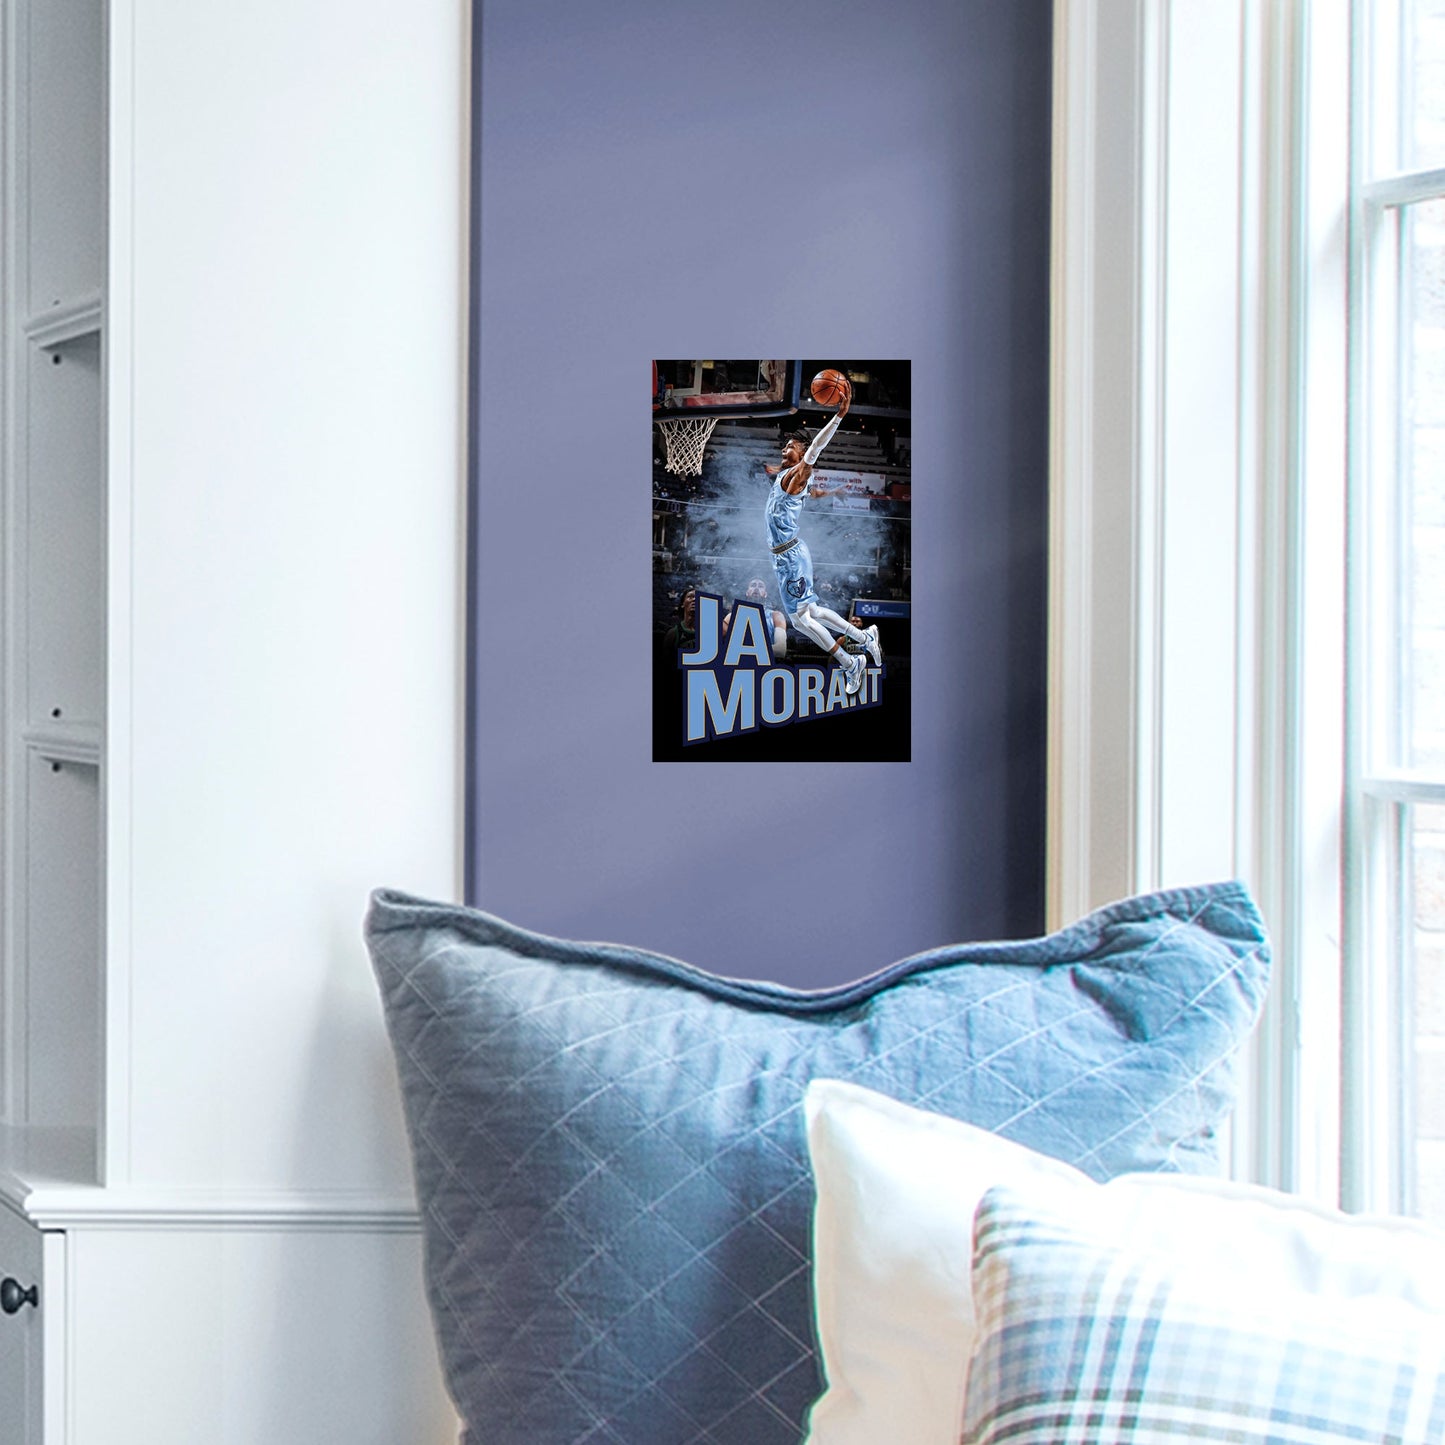 Memphis Grizzlies: Ja Morant Artistic Poster - Officially Licensed NBA Removable Adhesive Decal